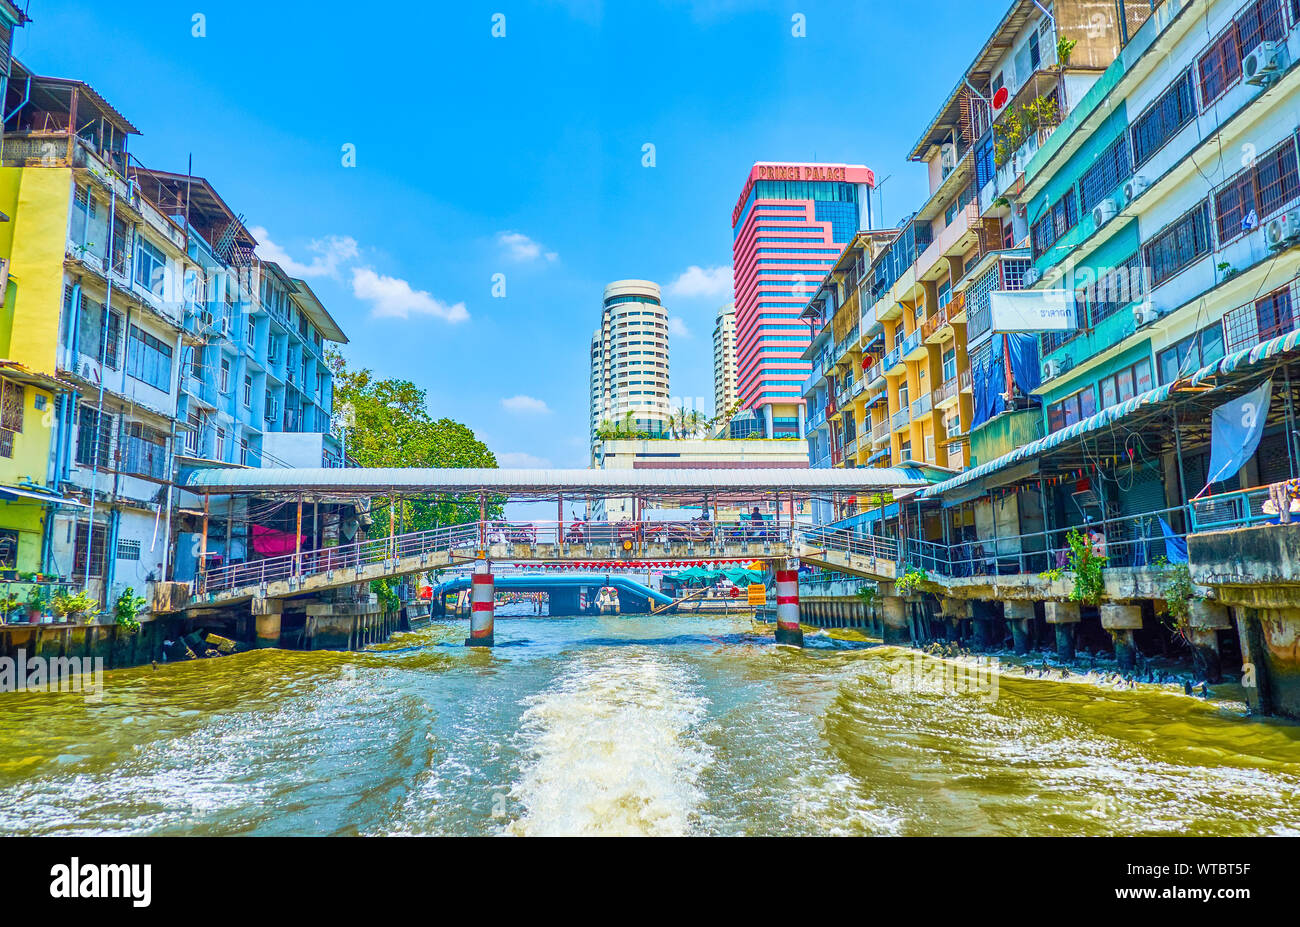 BANGKOK, THAILAND - APRIL 24, 2019: The Saensaep khlong leads through modern district of the city with residential houses,  numerous bridges and high Stock Photo